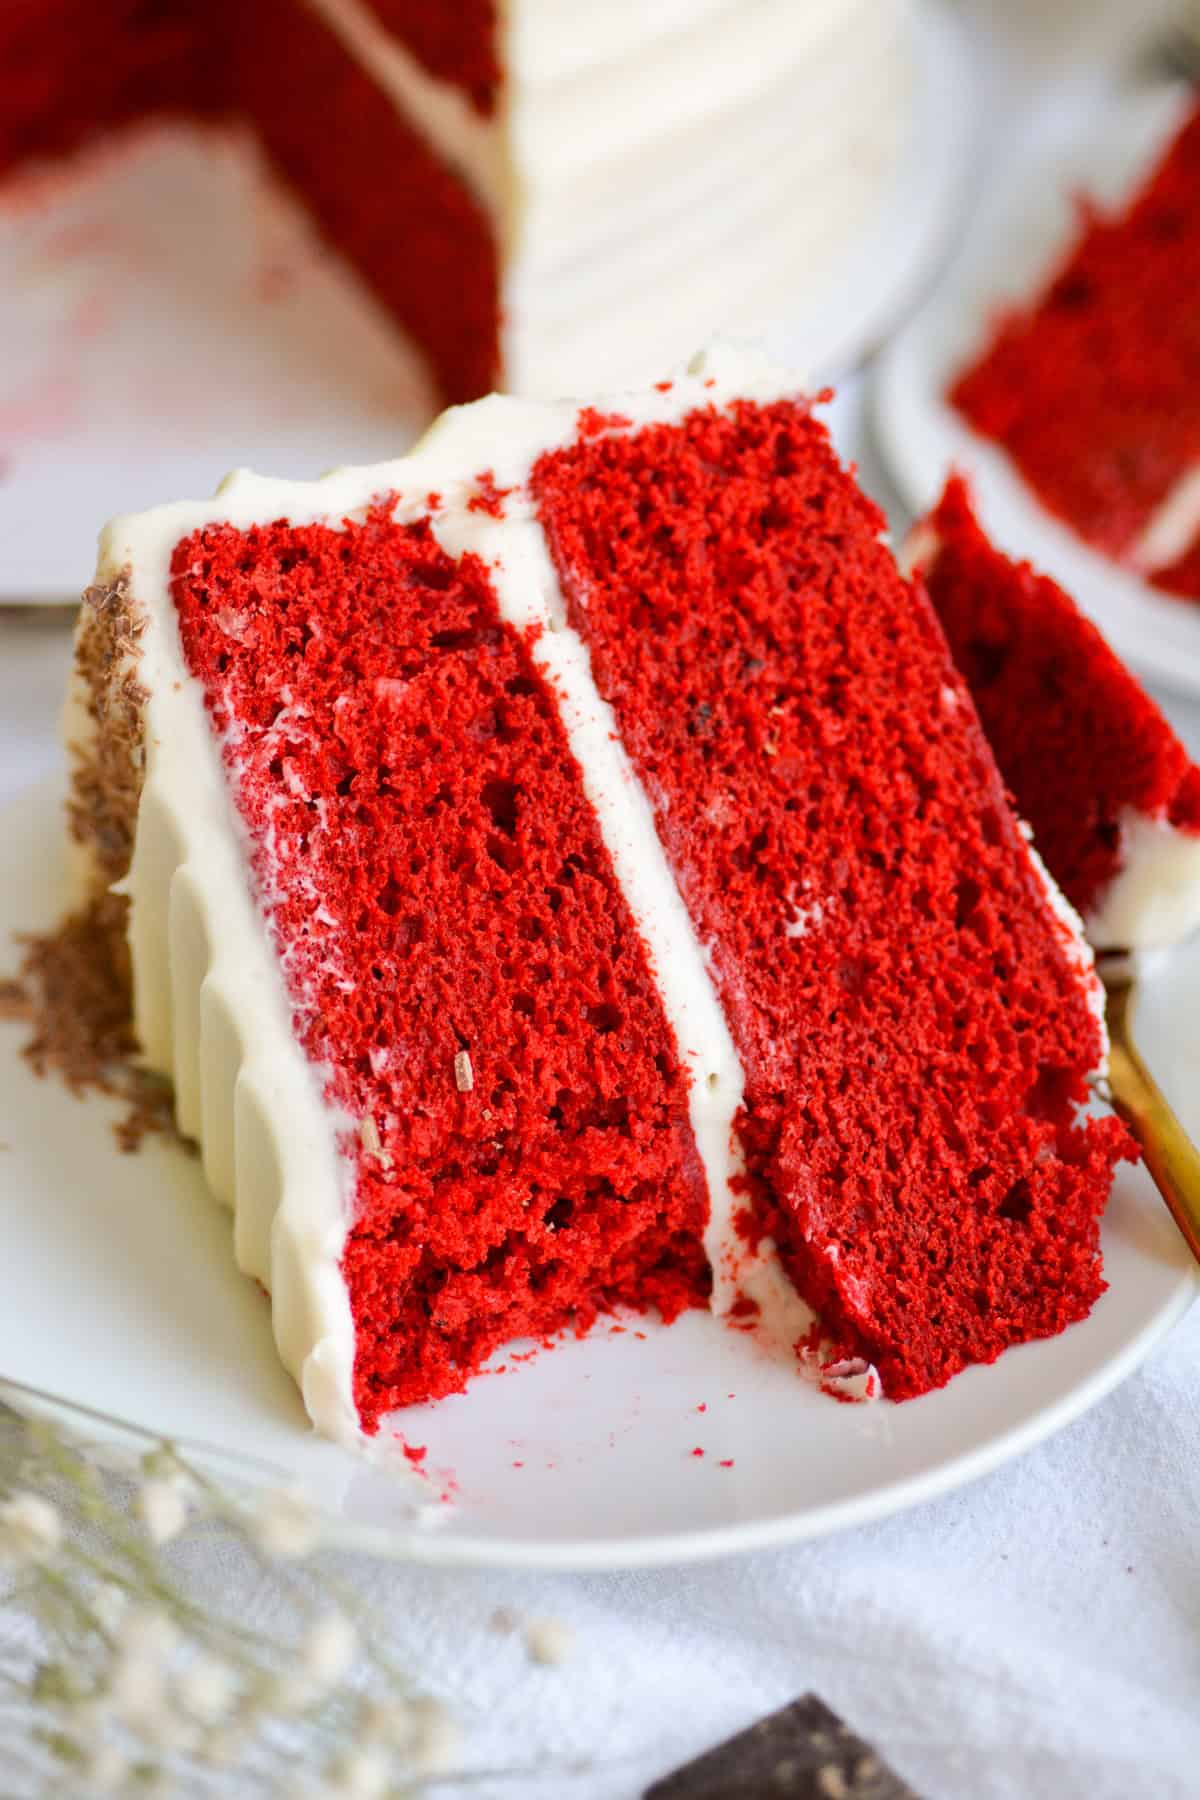 Vegan red velvet cake slice on a plate with a bite taken out of it.